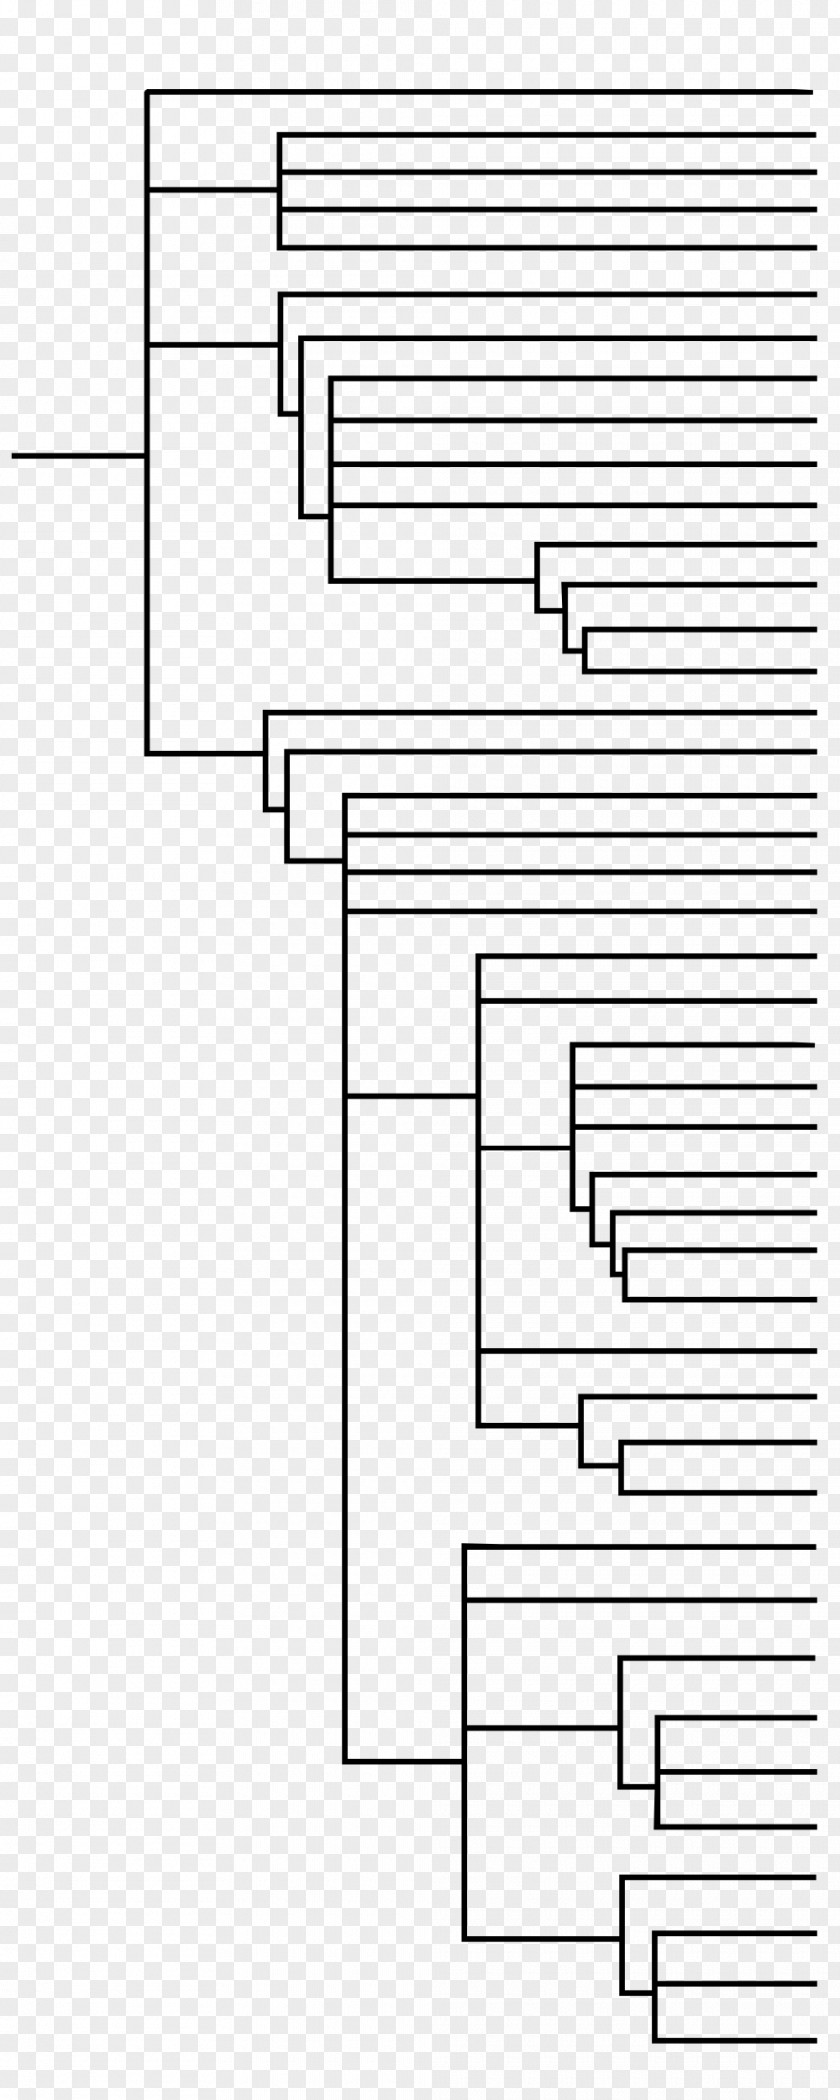 APG II System Angiosperm Phylogeny Group III Cladogram PNG